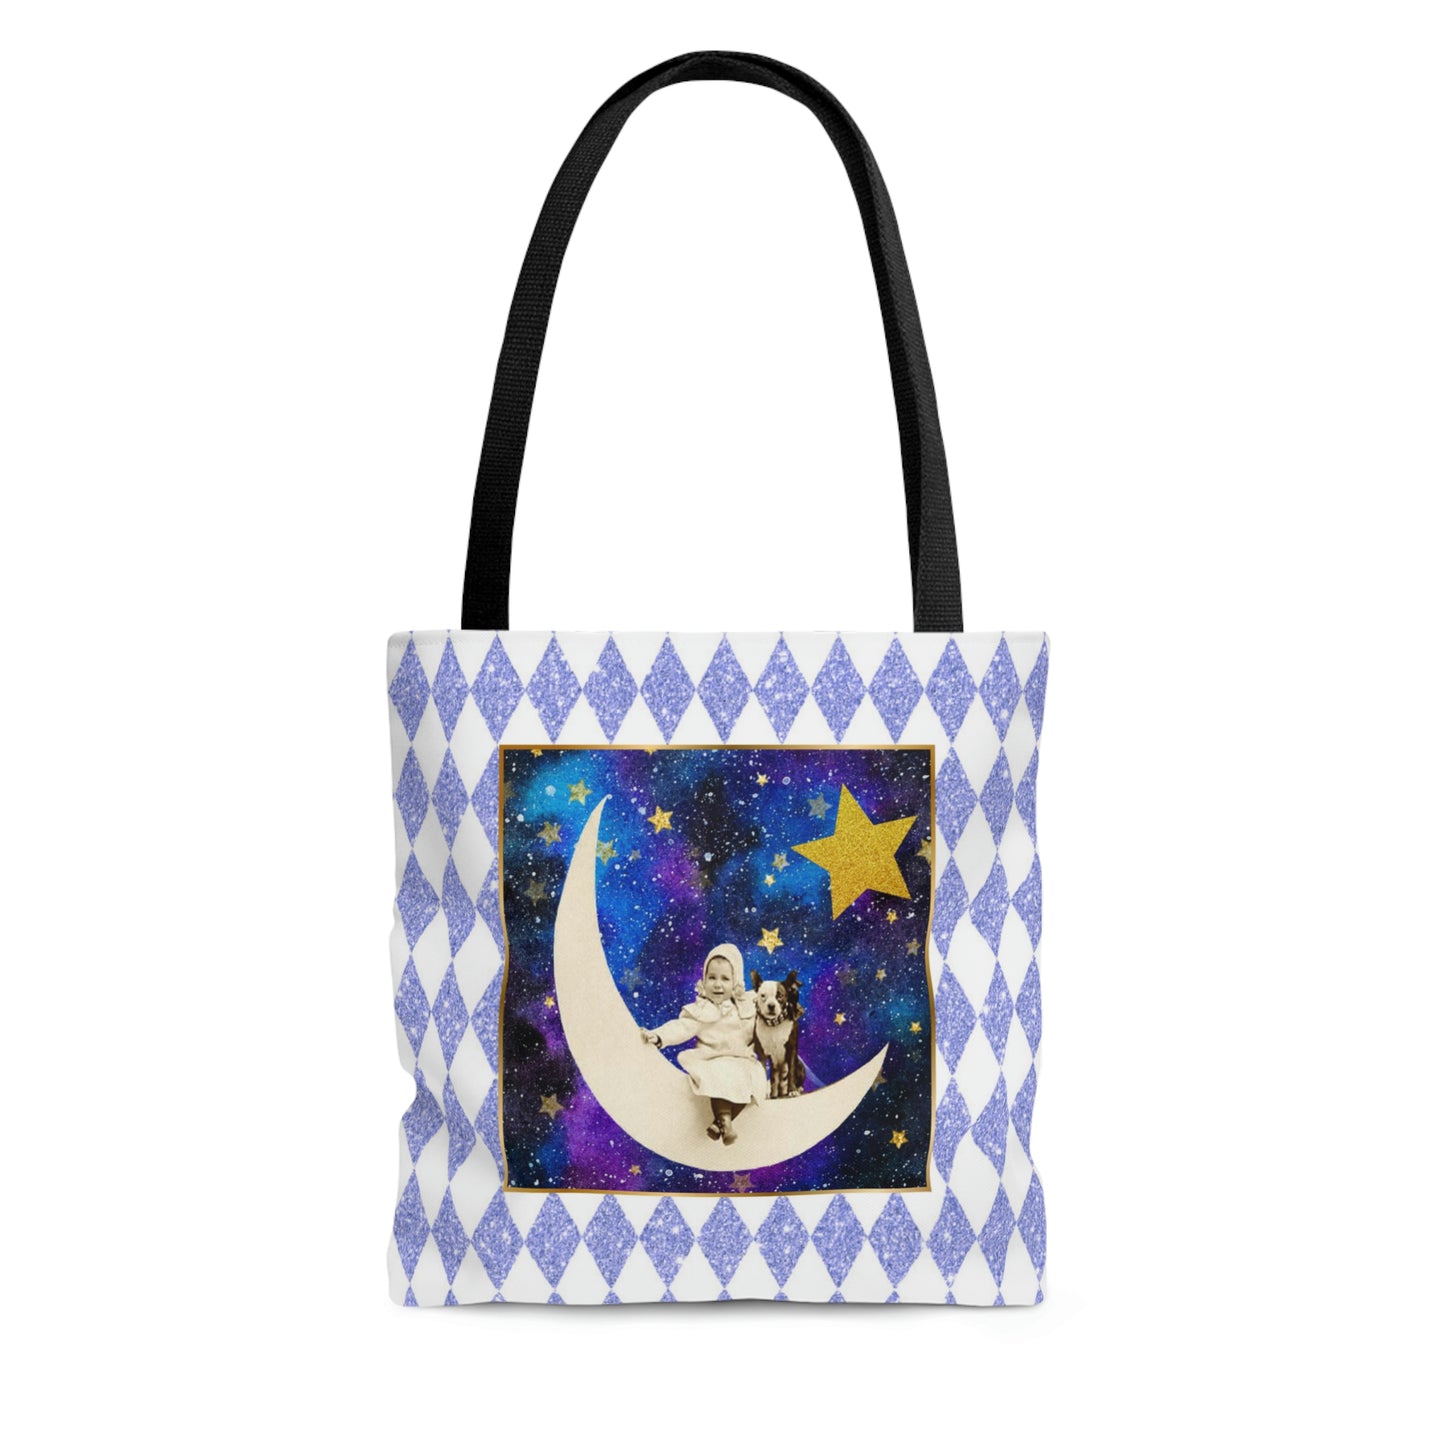 Cute Shopping Tote Bag, 3 sizes, Periwinkle Glitter Harlequin Print, Vintage Photo Girl on Crescent Moon, Boston Terrier, Gold Stars Accent